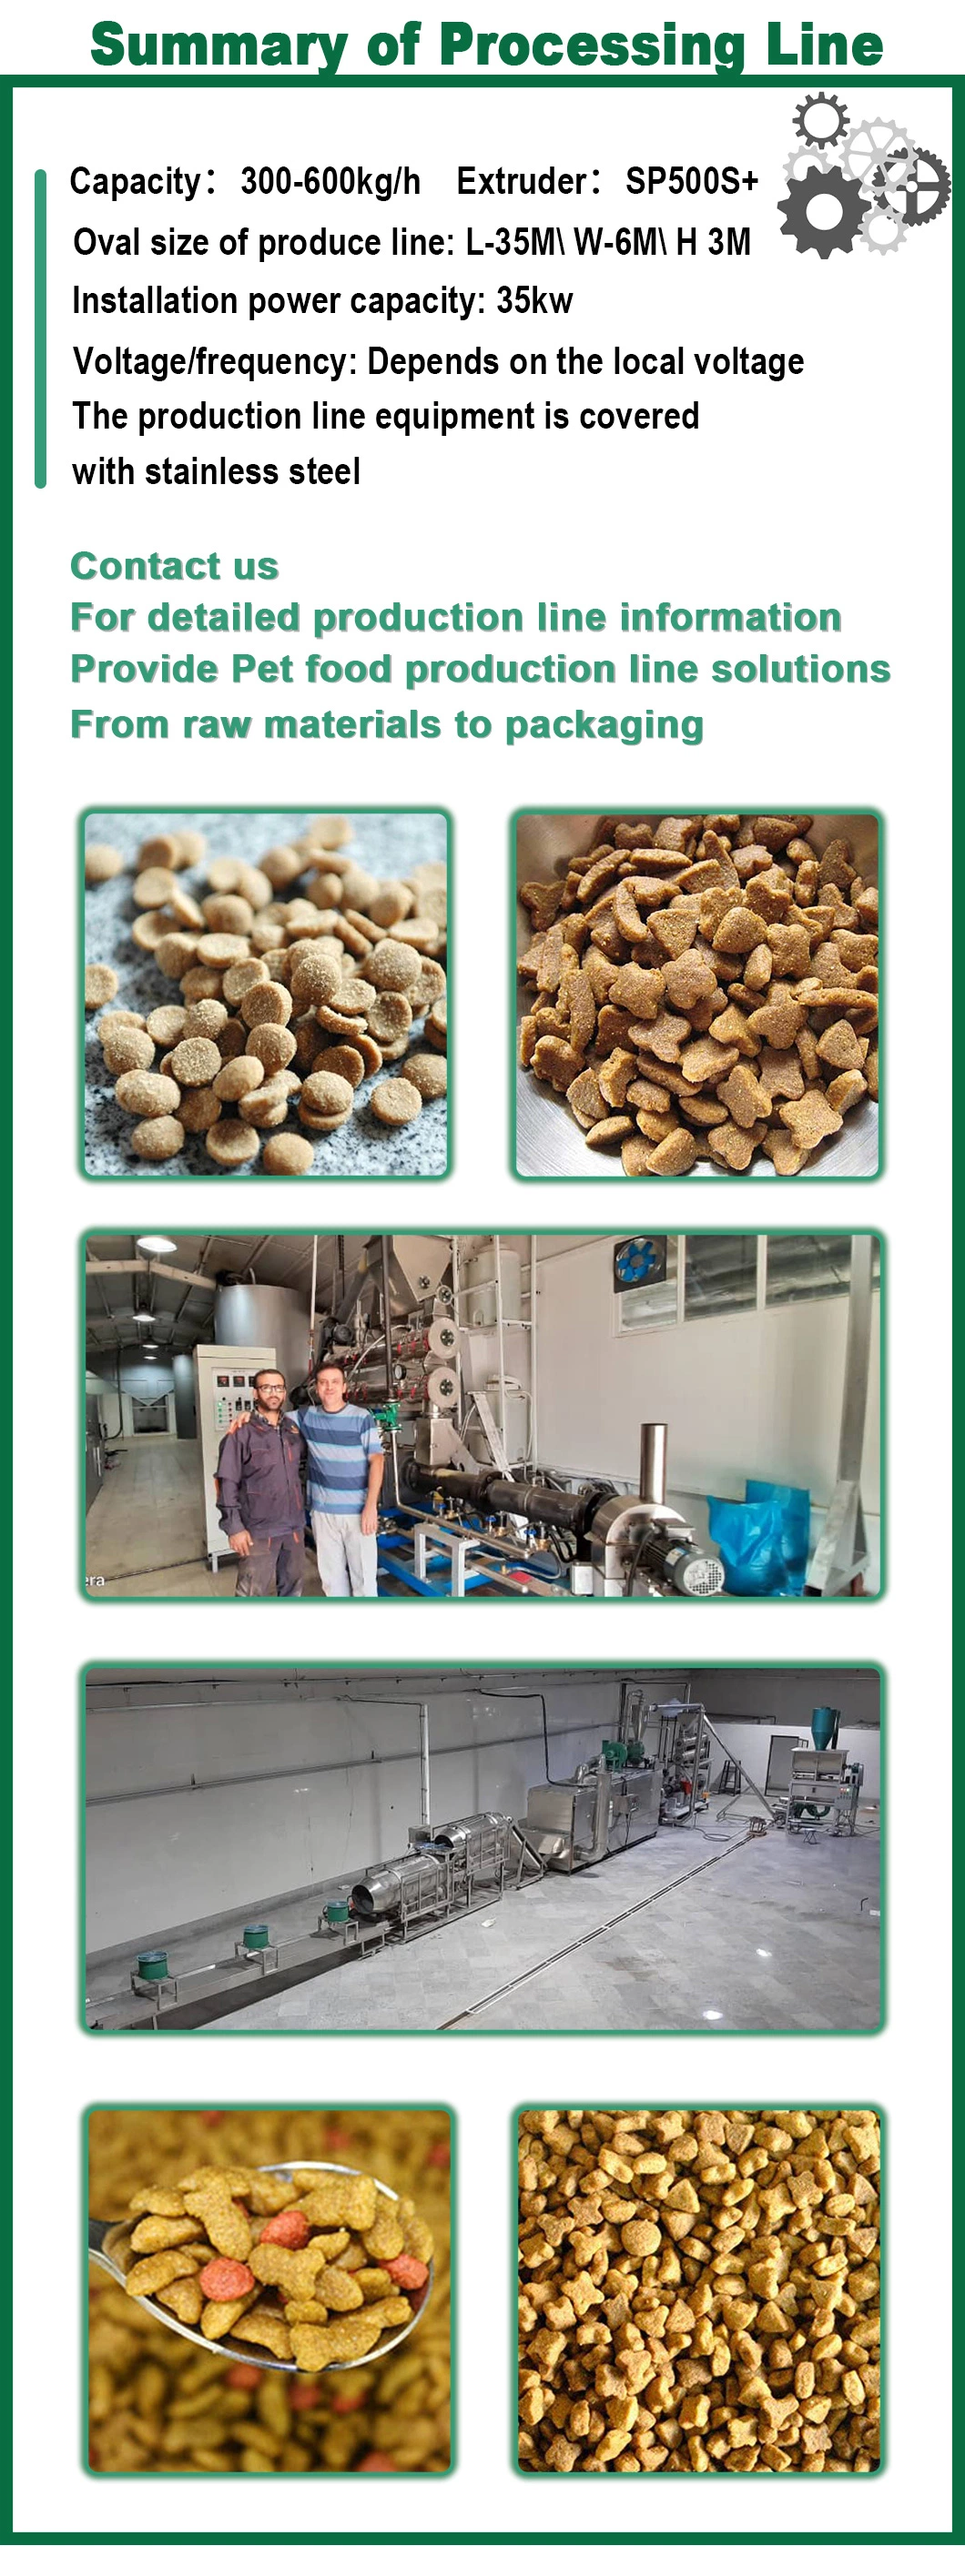 Agent Wanted Pet Food Supply Machine + Dri Dog Feed Processing Machines Pellet Making Produce Line for Producing Pets Extruder Equipmentfish Dryer Production